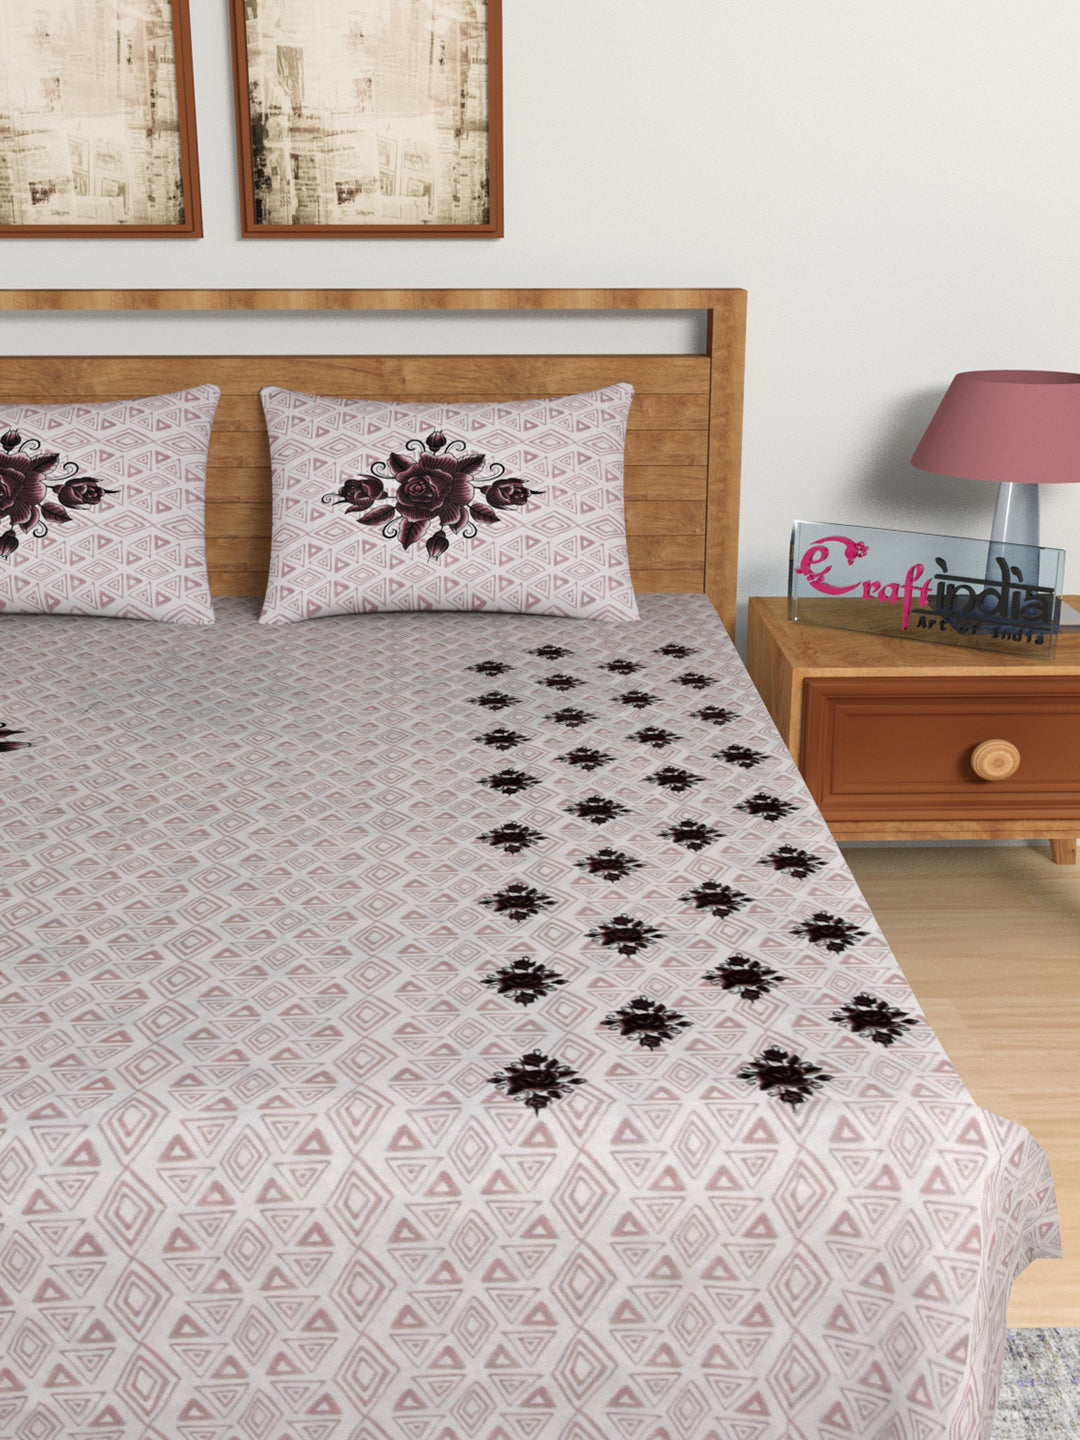 180 TC Pure Cotton Premium Double Bed King Size Floral Design Bedsheet (100 In x 108 In) with 2 pillow cover - Brown 3